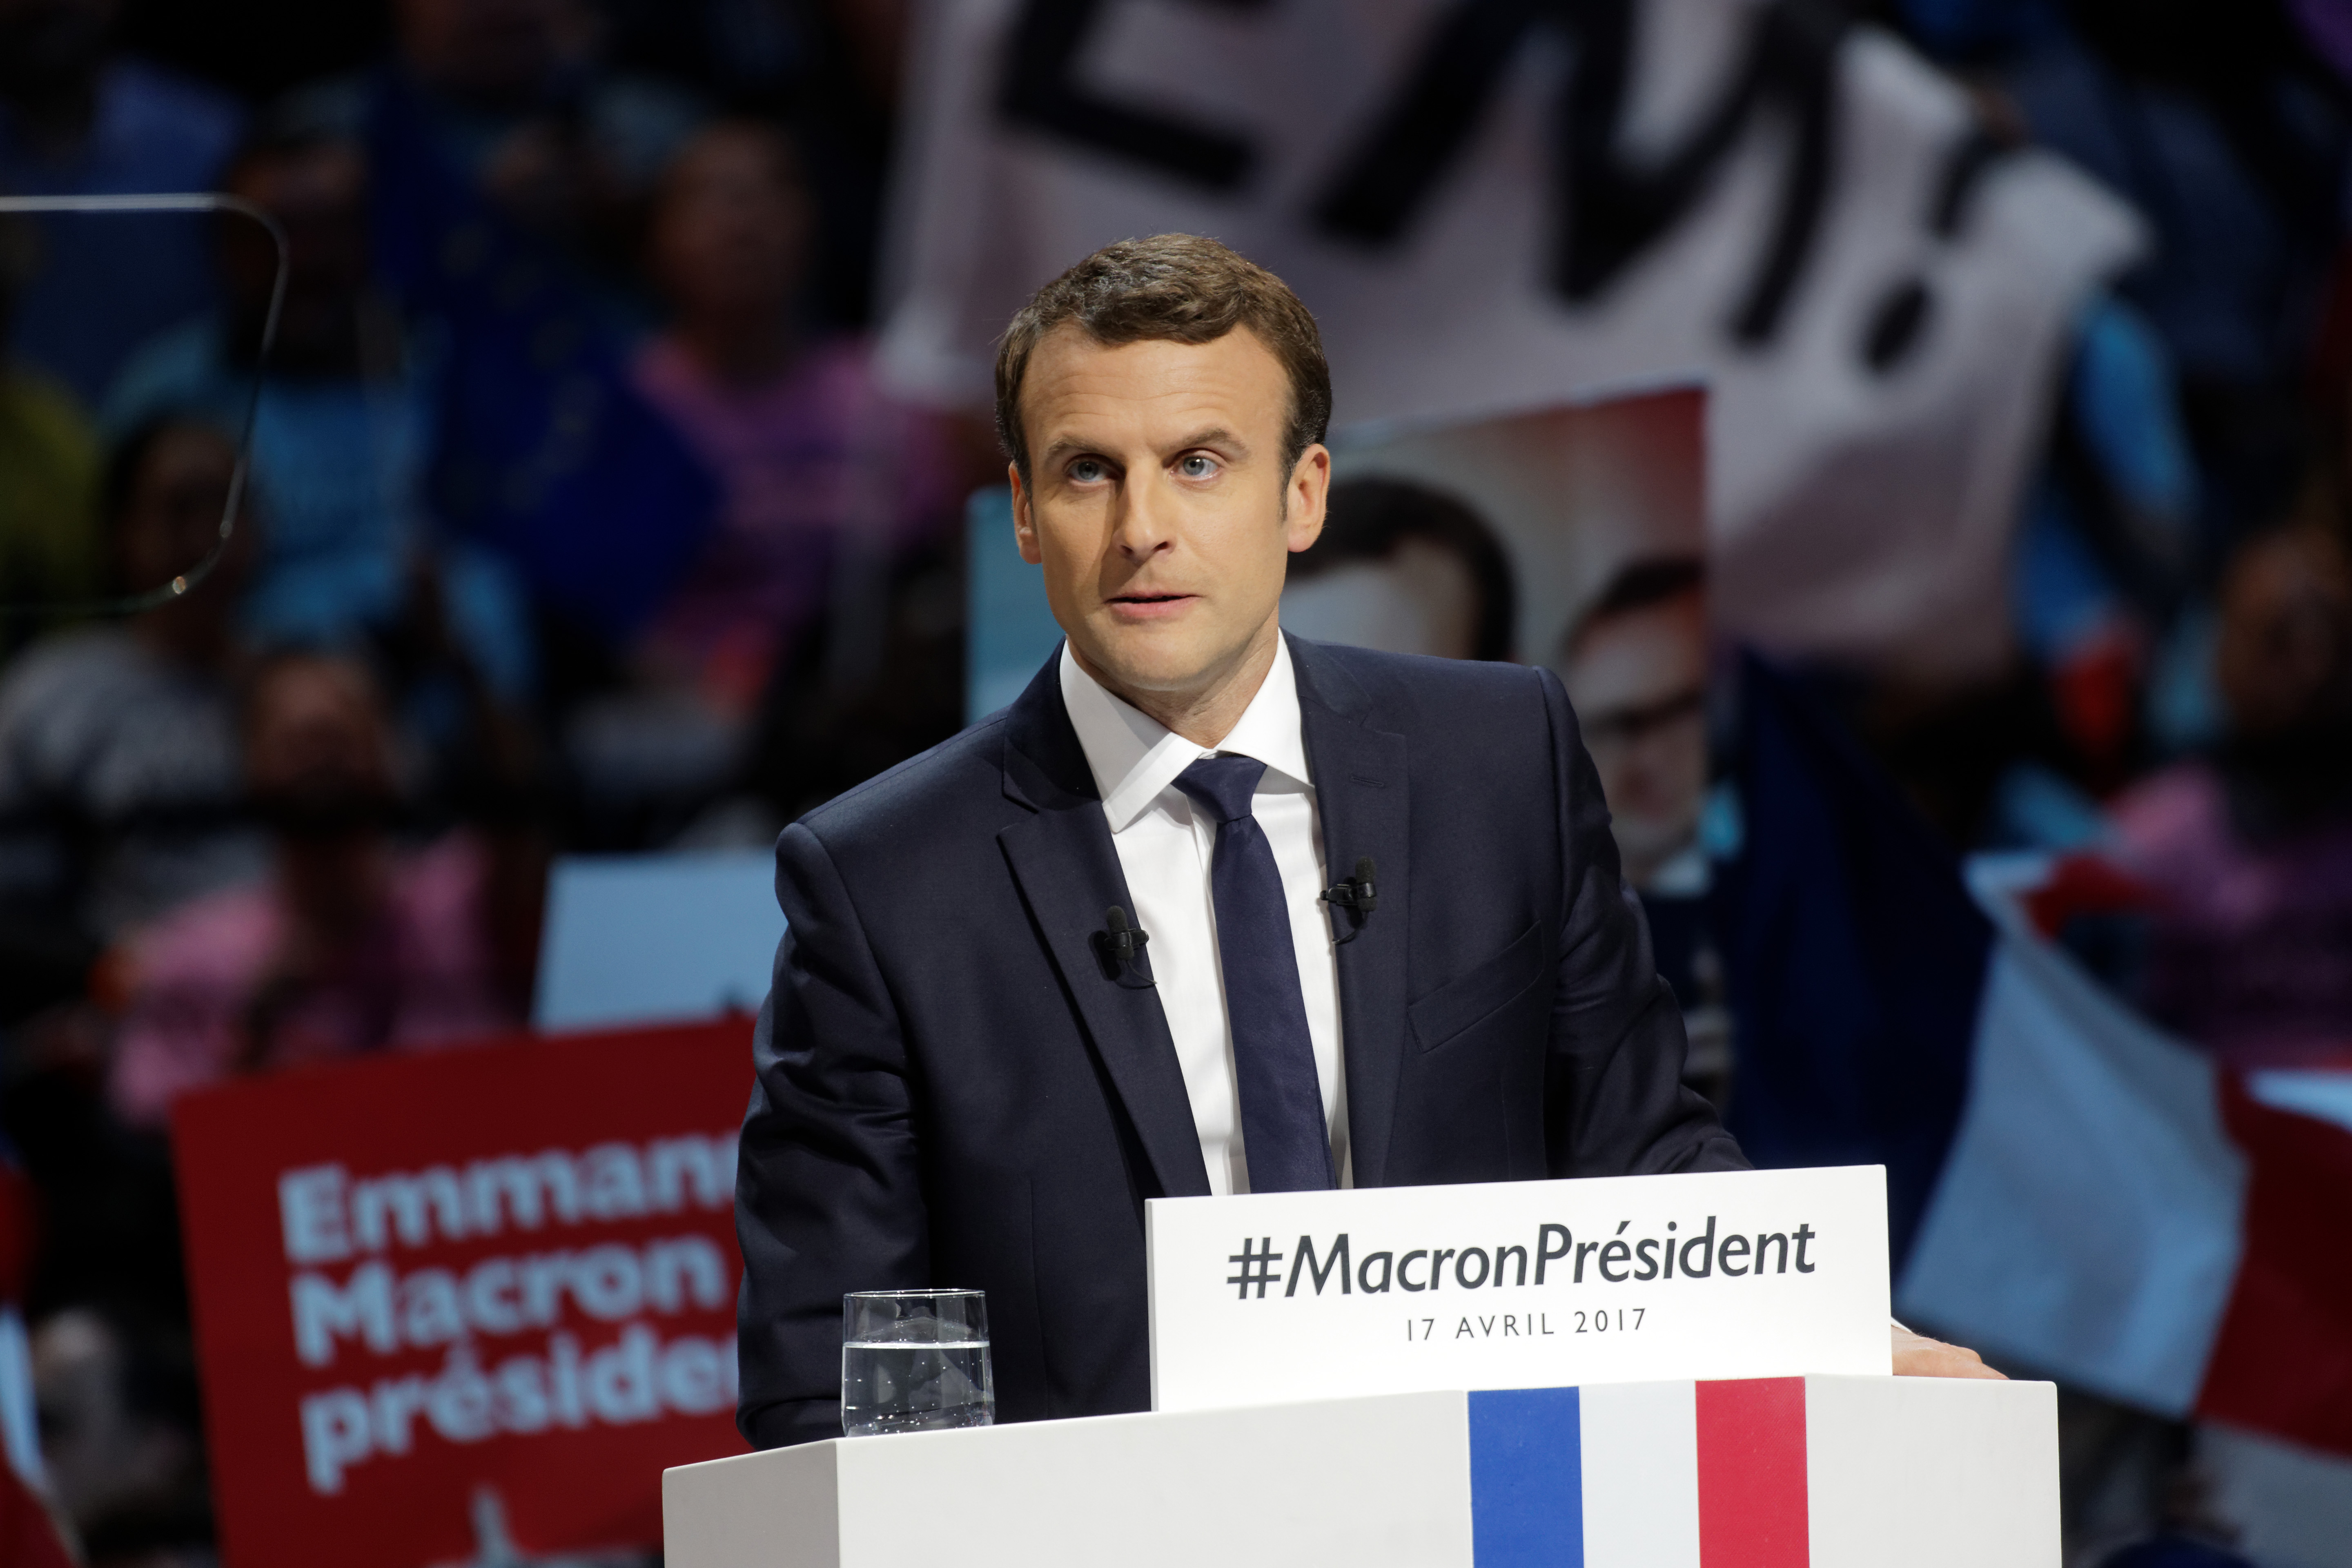 Macron campaign for French presidency off to slower start than Le Pen: poll